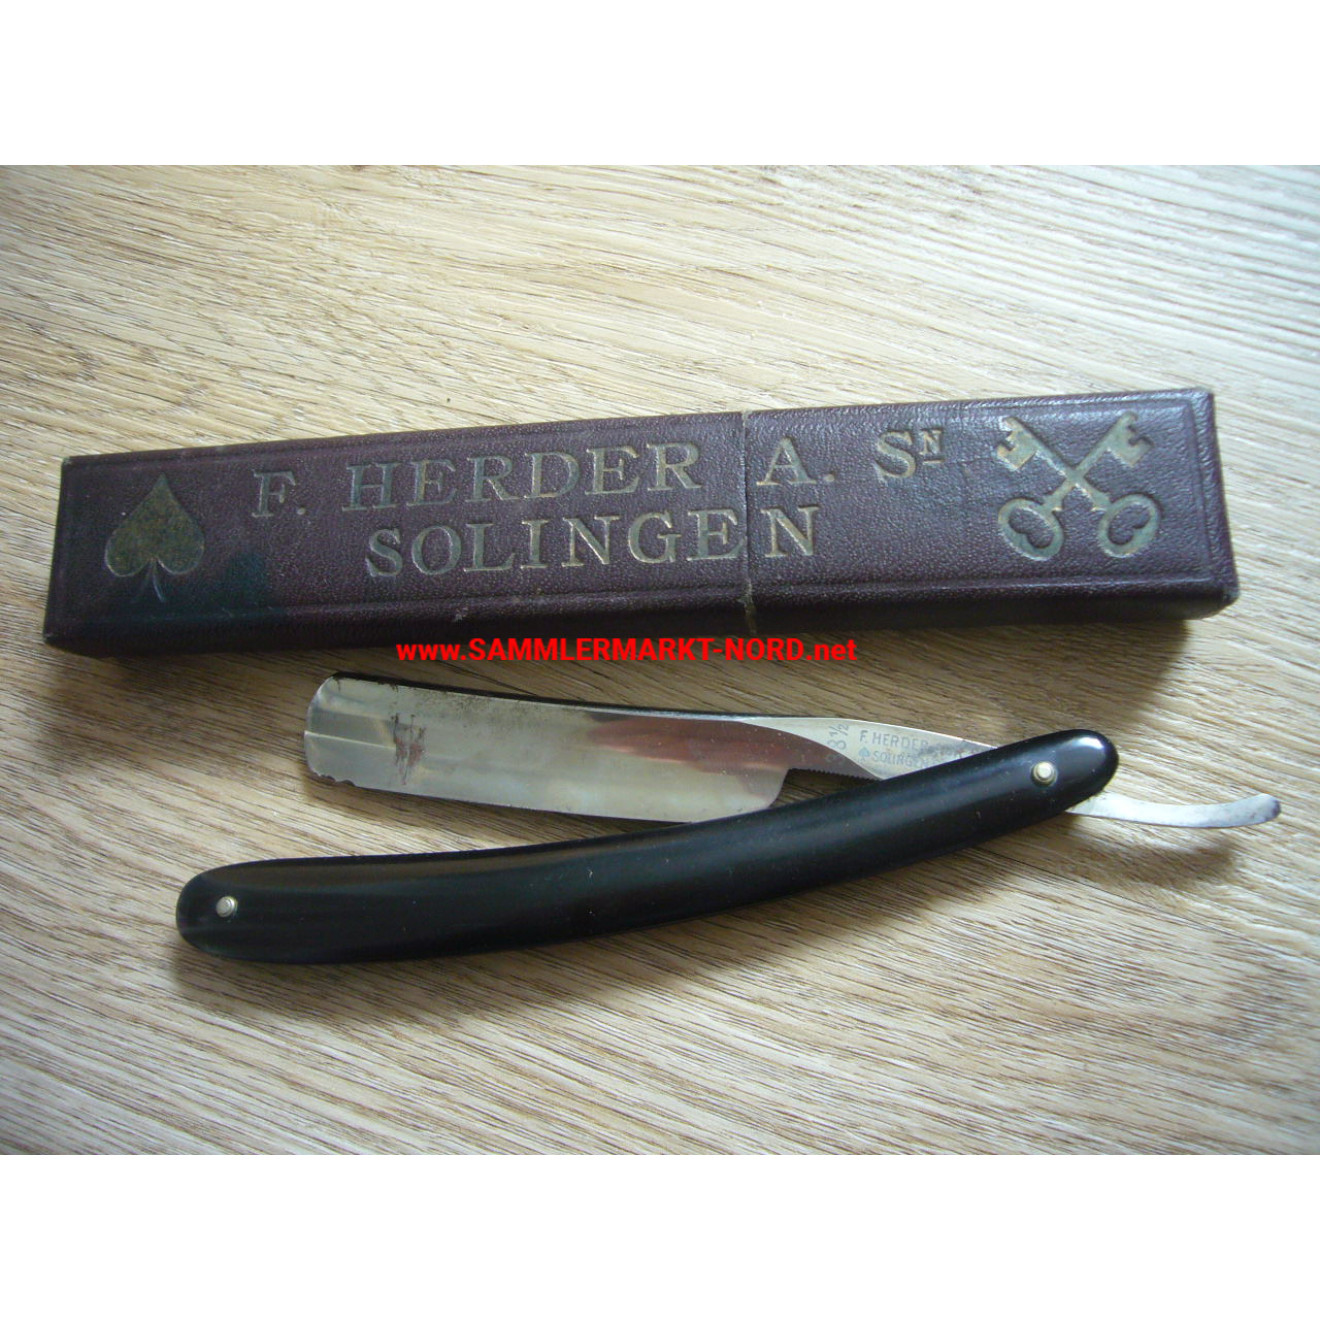 Wehrmacht sutlers - razor with box - personal equipment